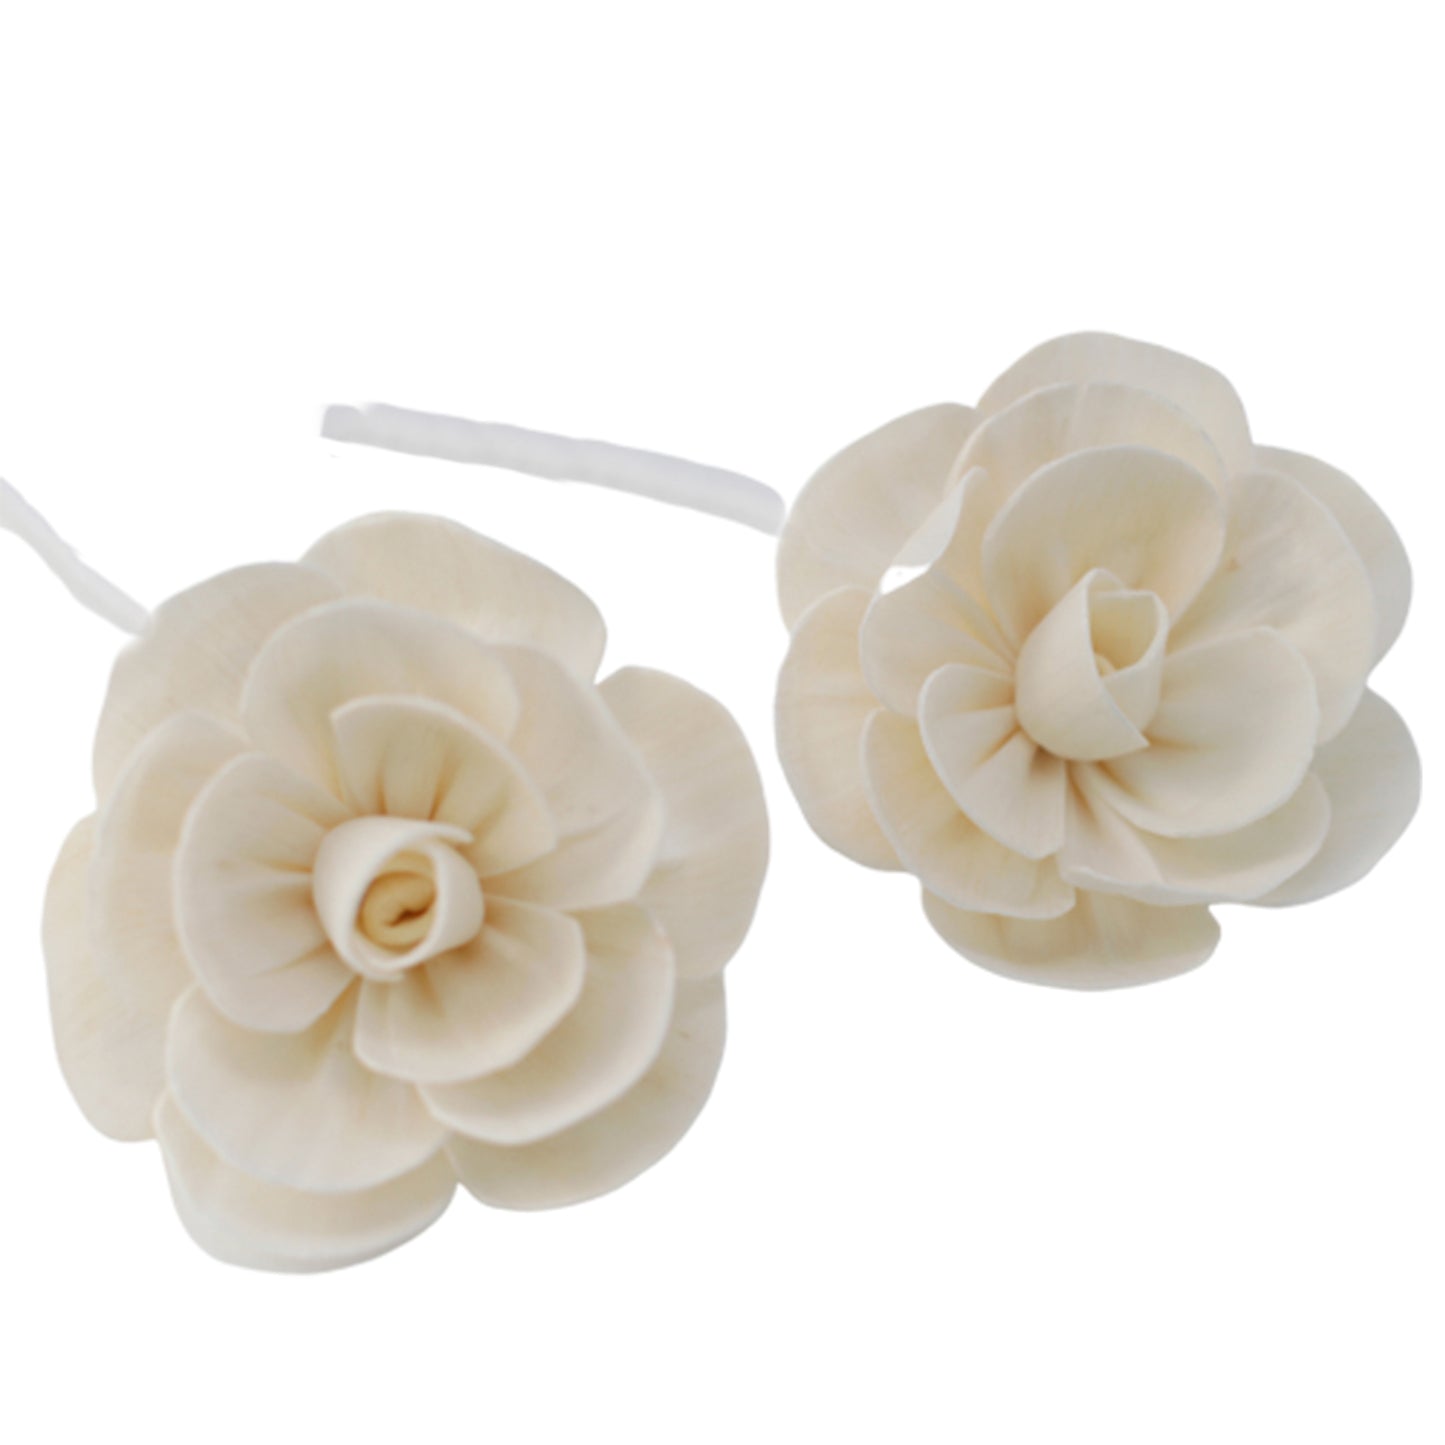 Natural Diffuser Flowers - Lrg Lotus on String